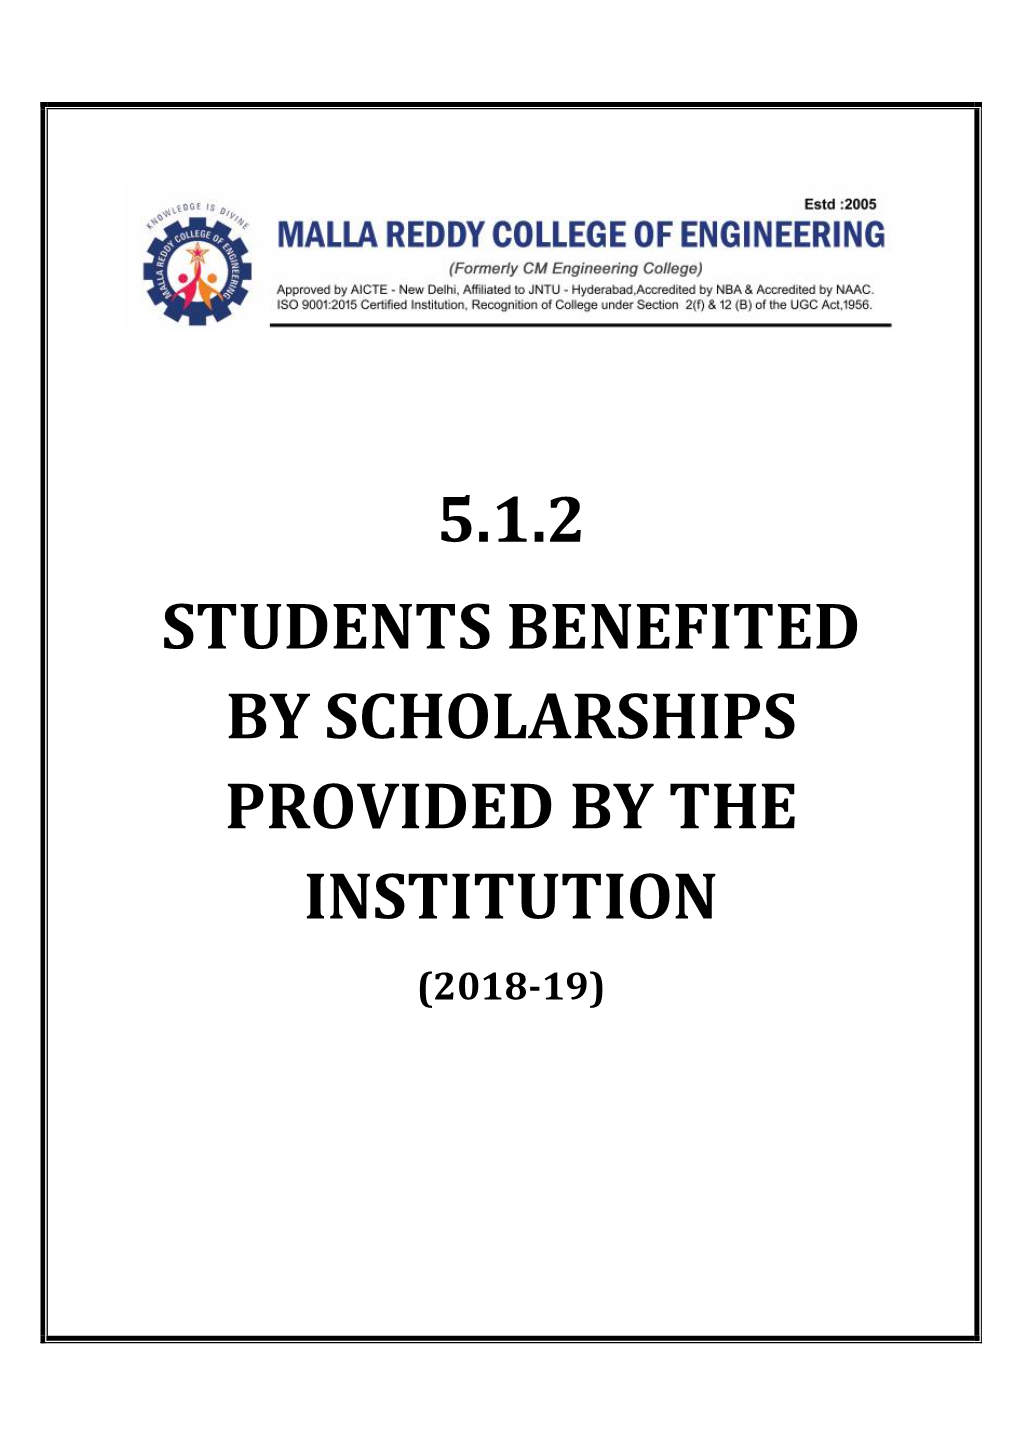 5.1.2 Students Benefited by Scholarships Provided by the Institution (2018-19)